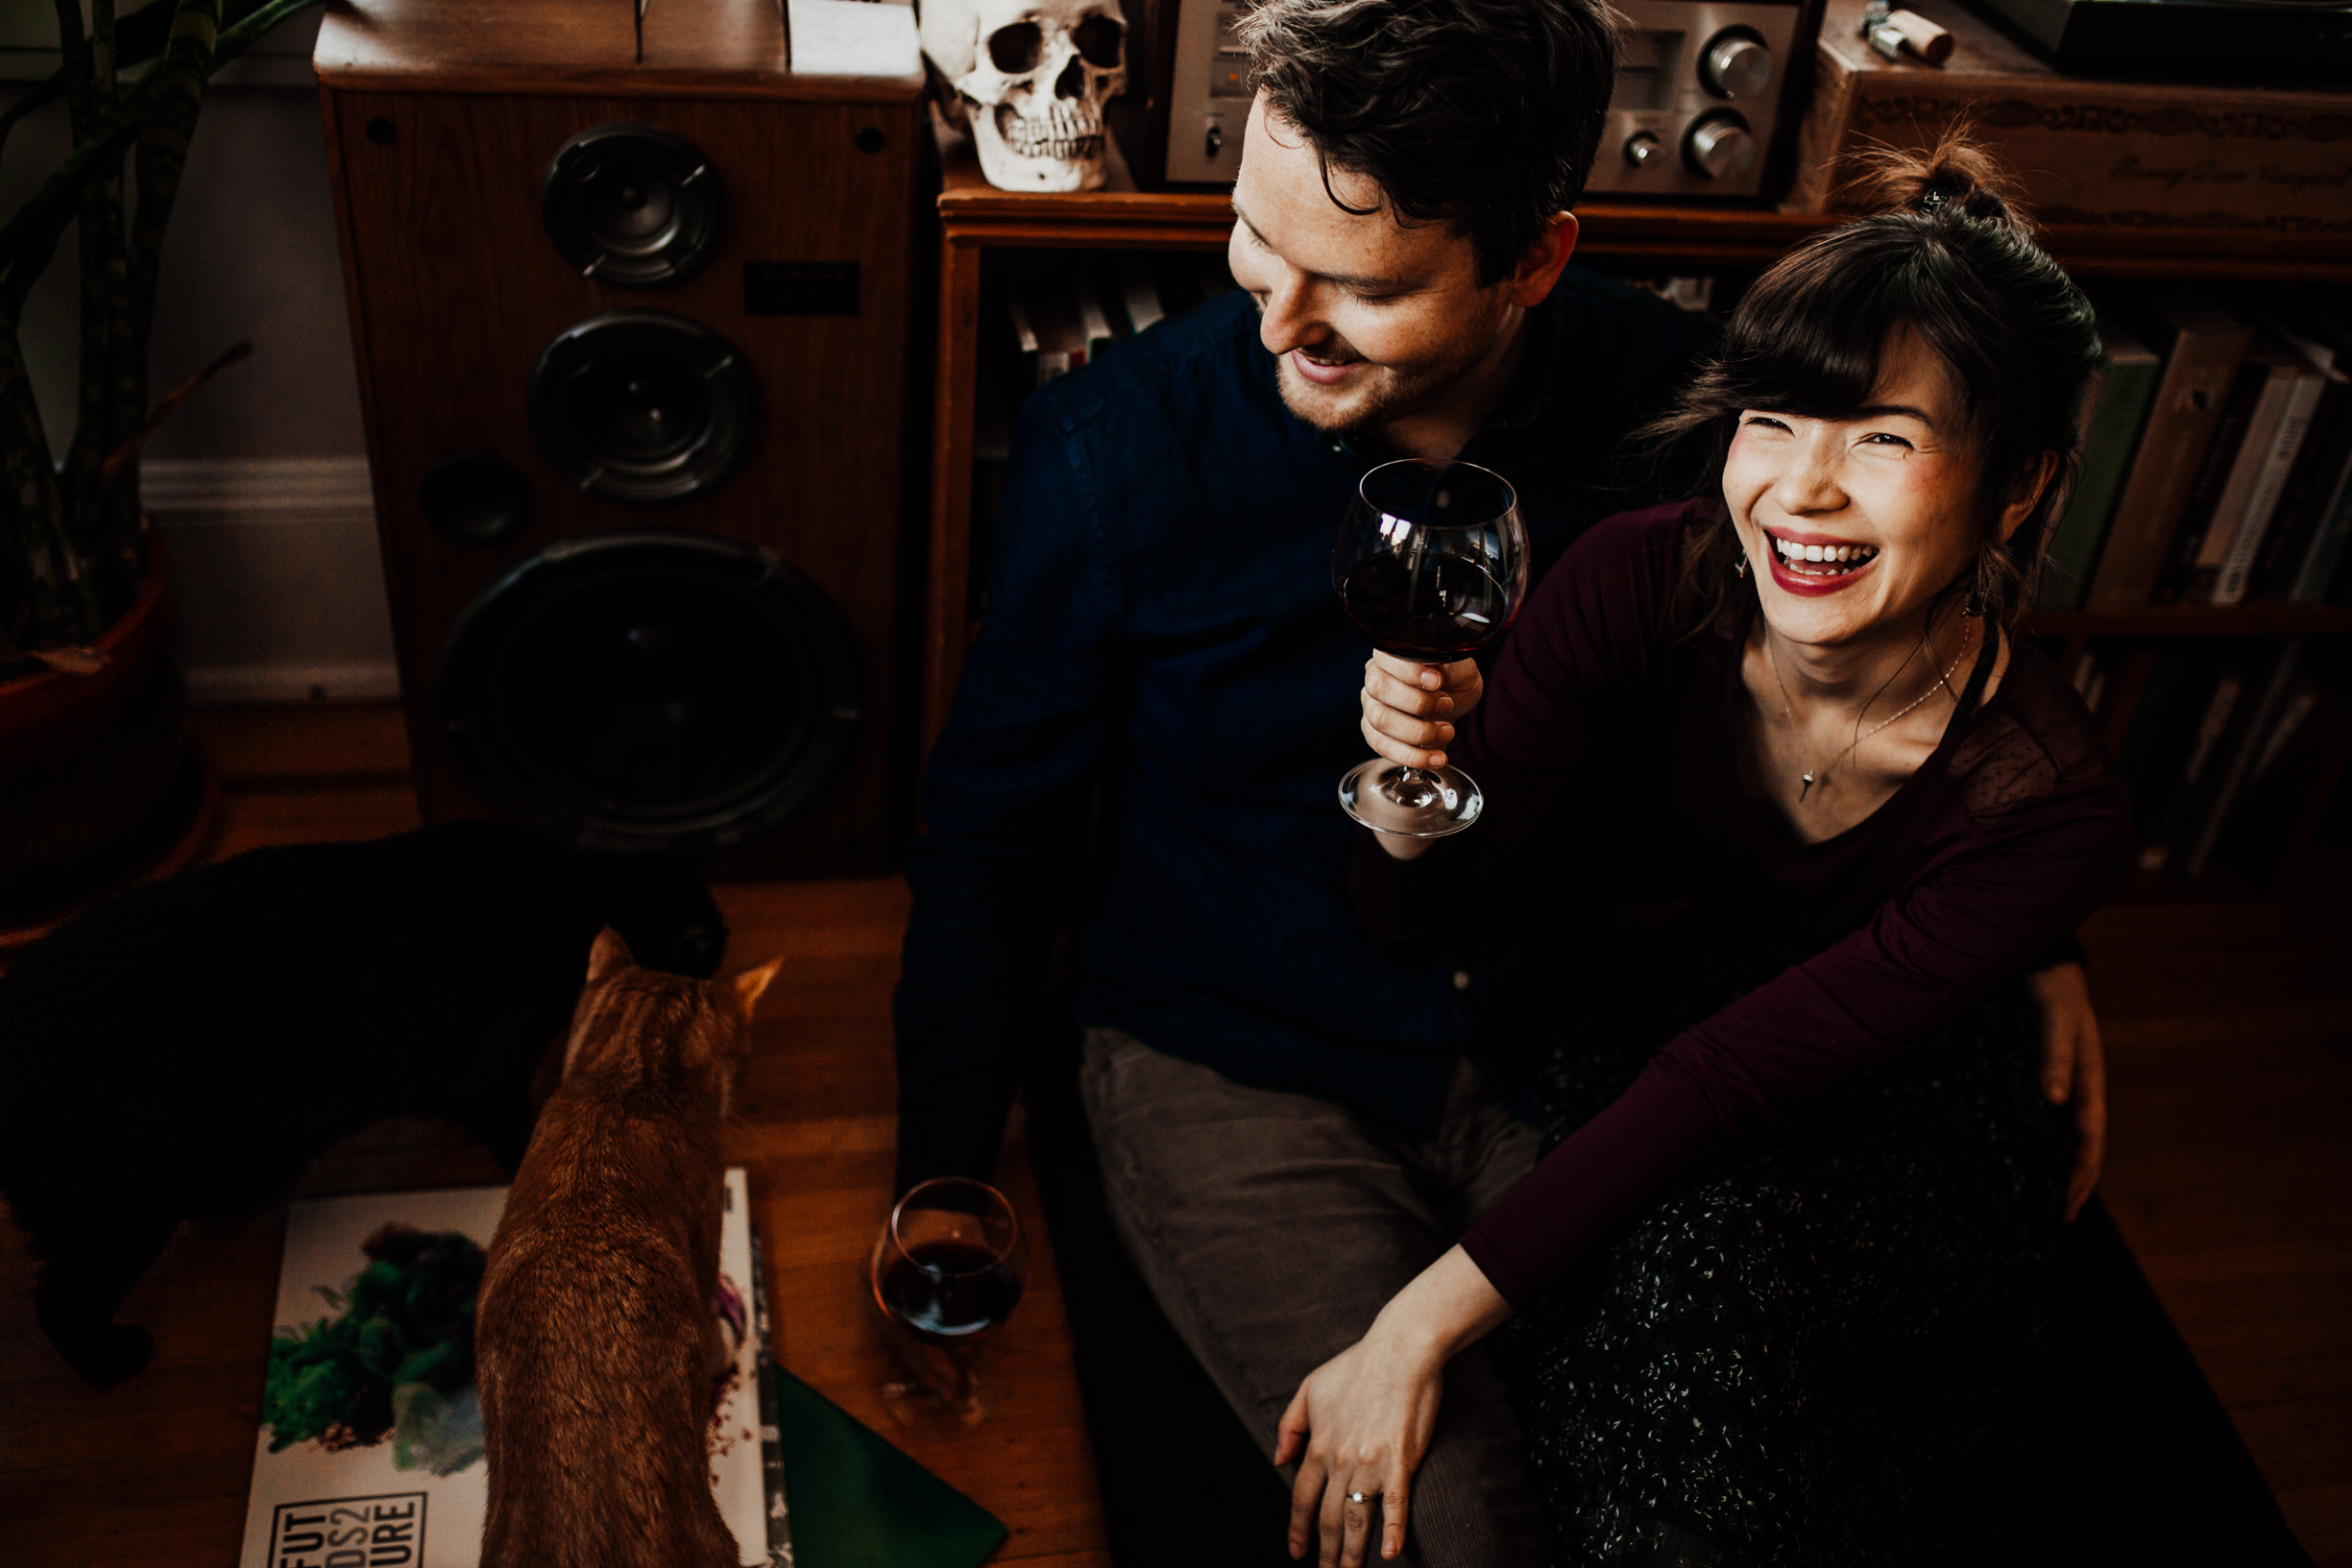 louisville-engagement-photographer-record-store-in-home-session-crystal-ludwick-photo (31 of 53).jpg